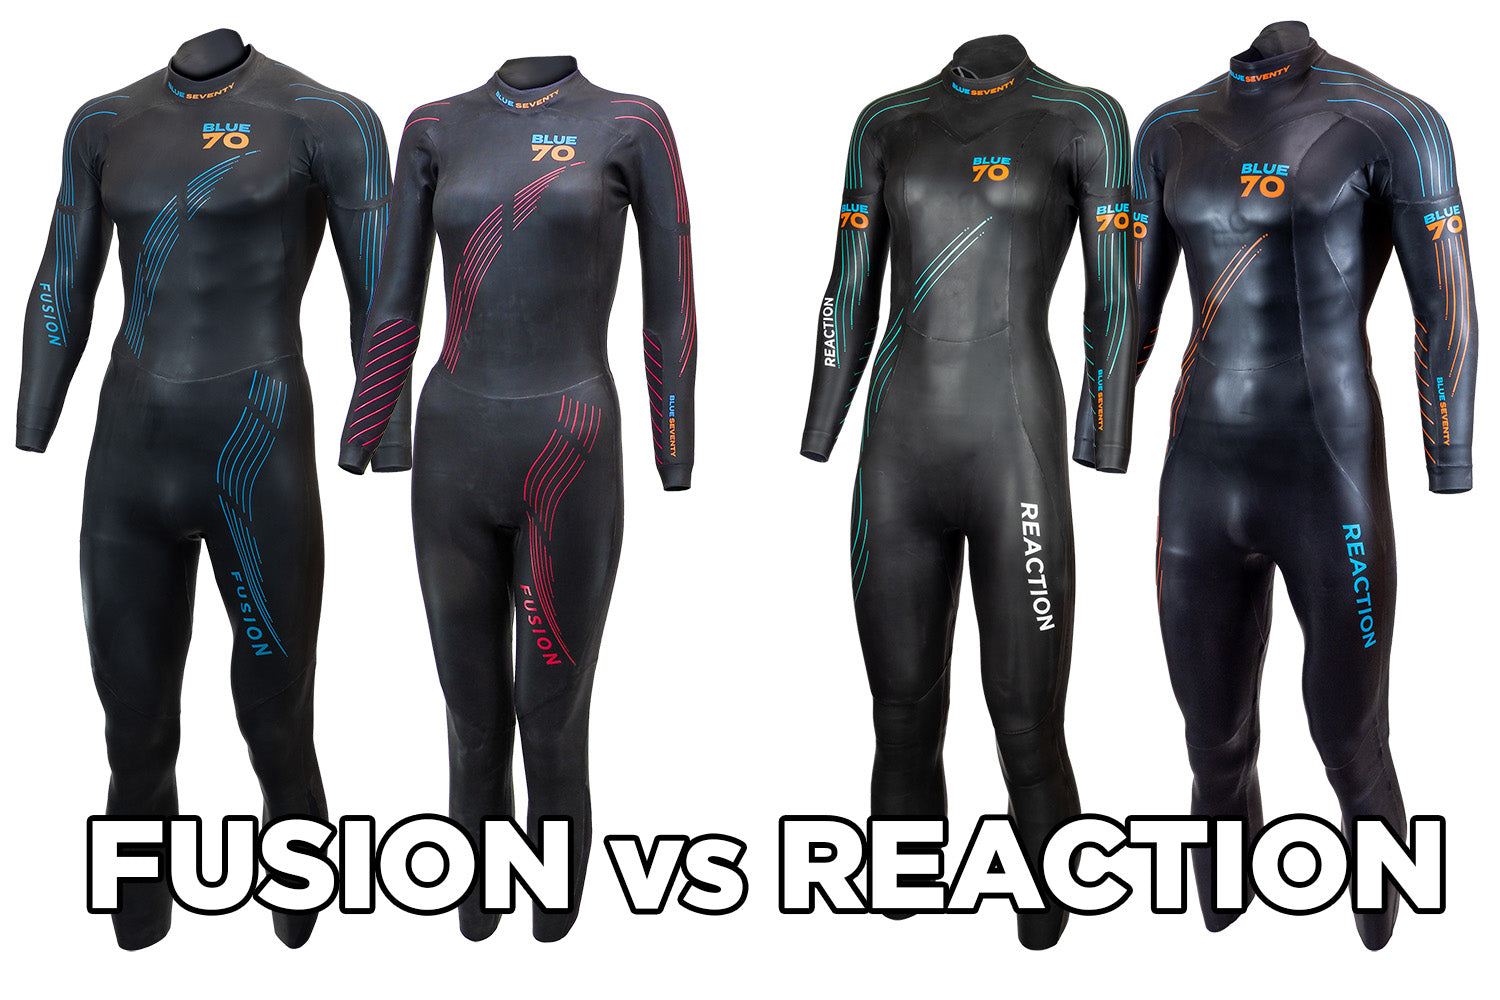 all mens and womens product images for the Fusion and Reaction wetsuits